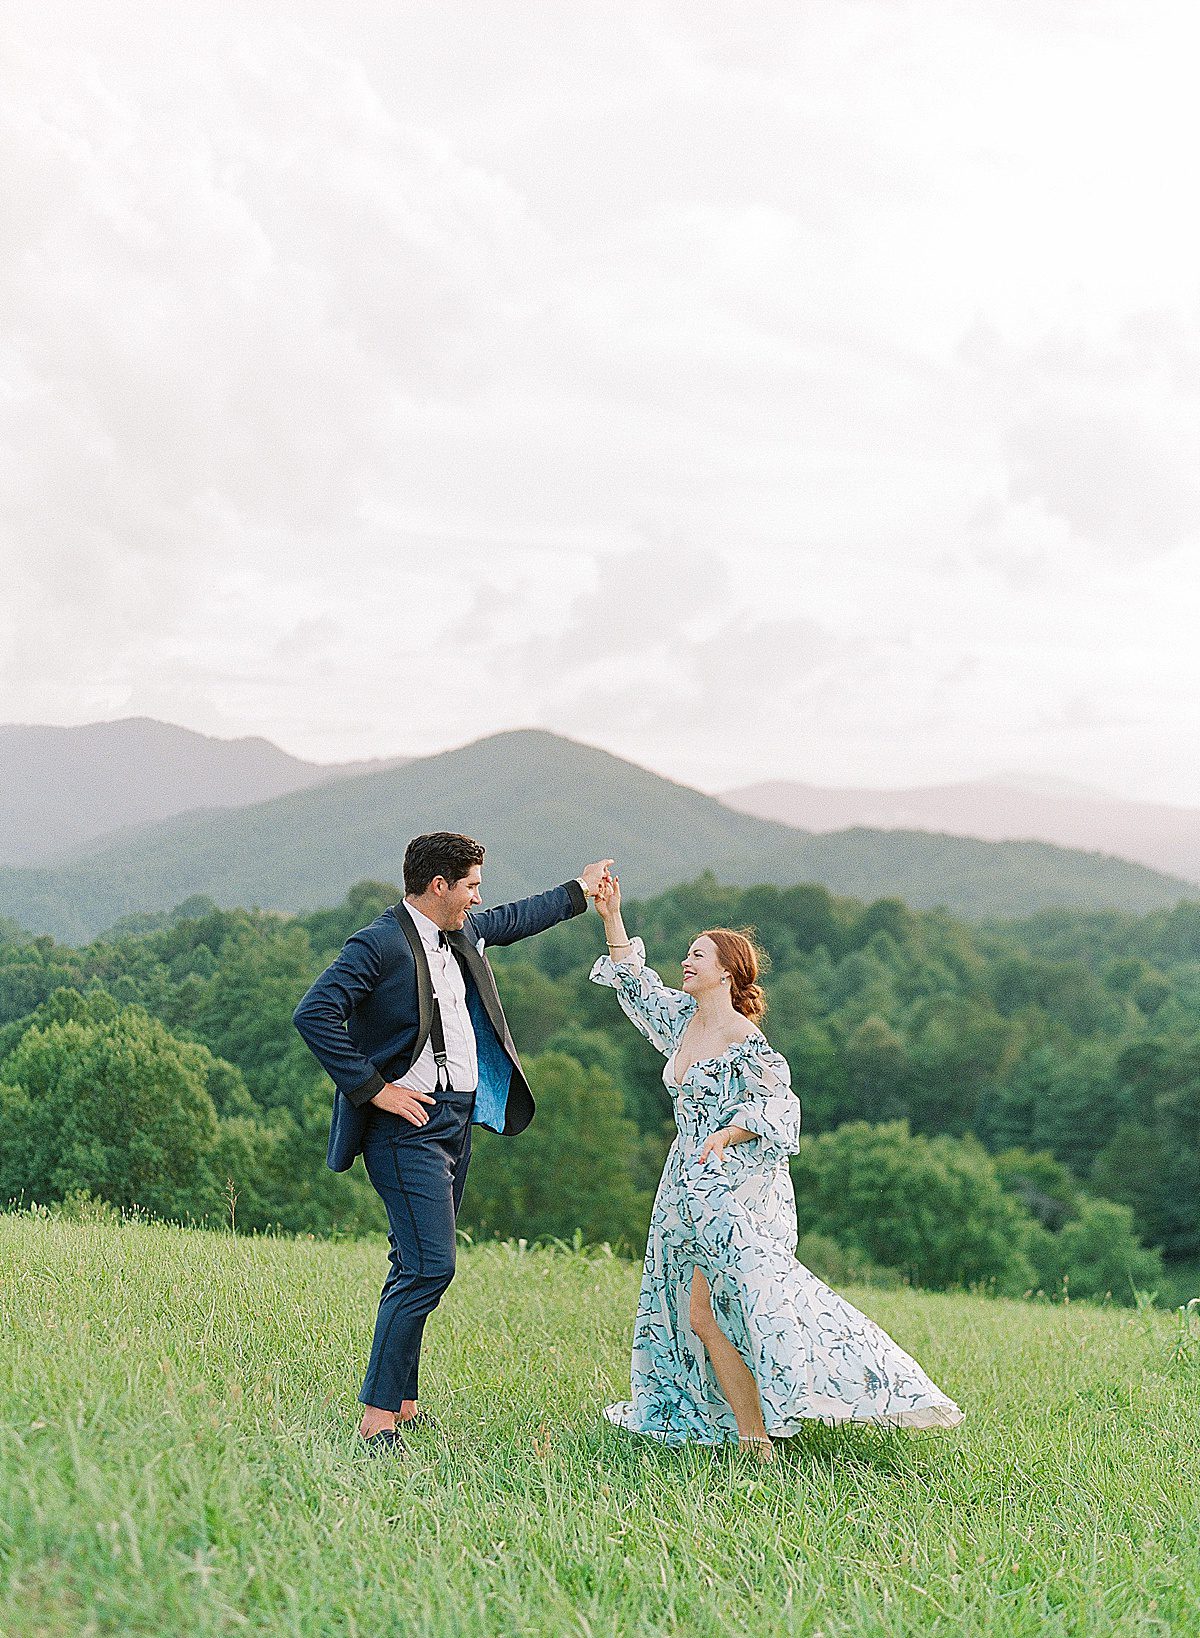 Artistic Asheville Wedding Photographer Captures Bride and Groom Dancing in Filed Photo